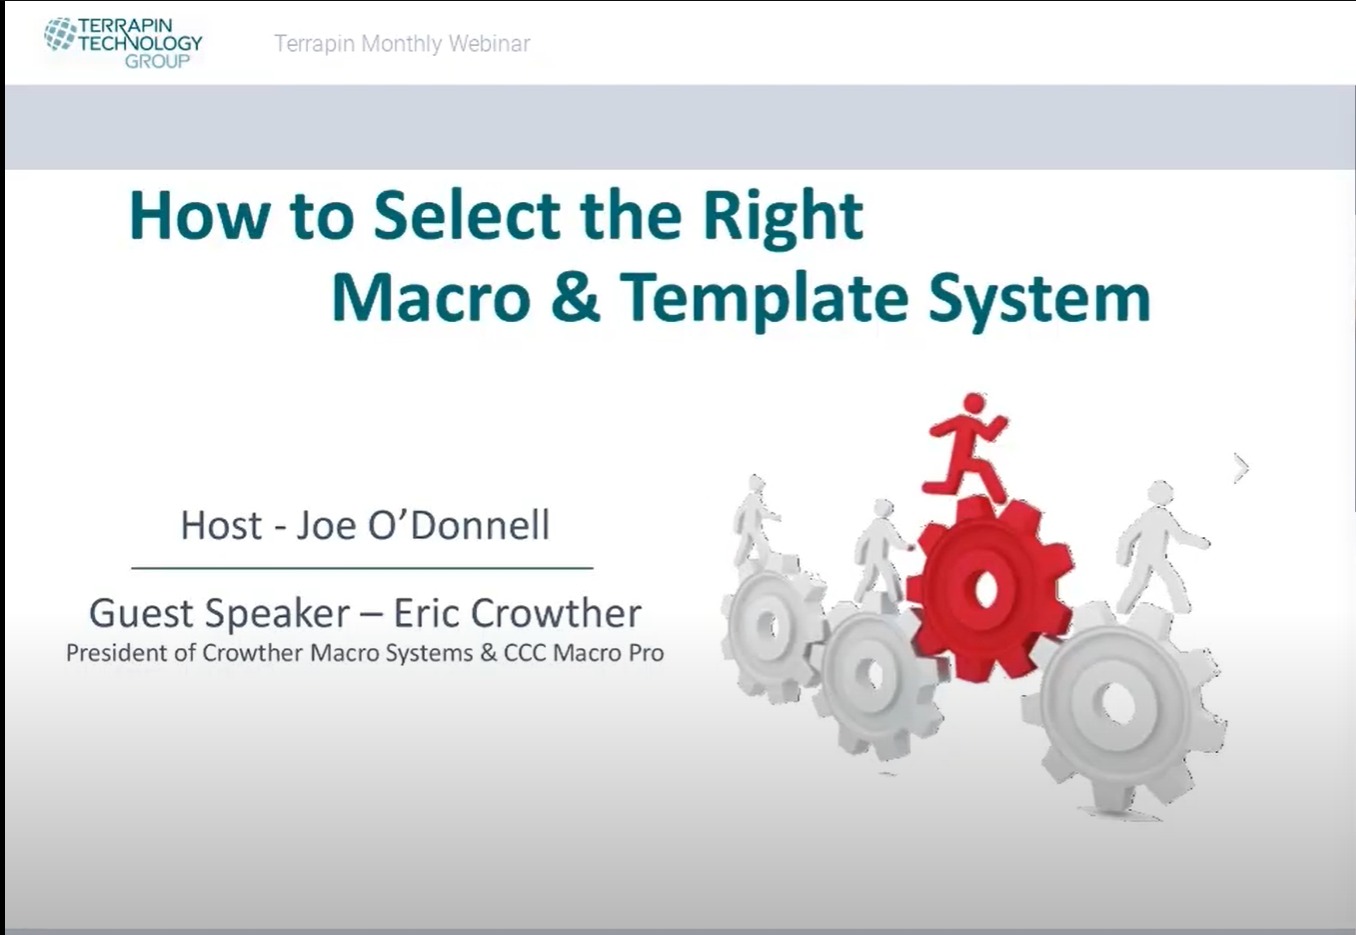 How to Select the Right Macro & Template System